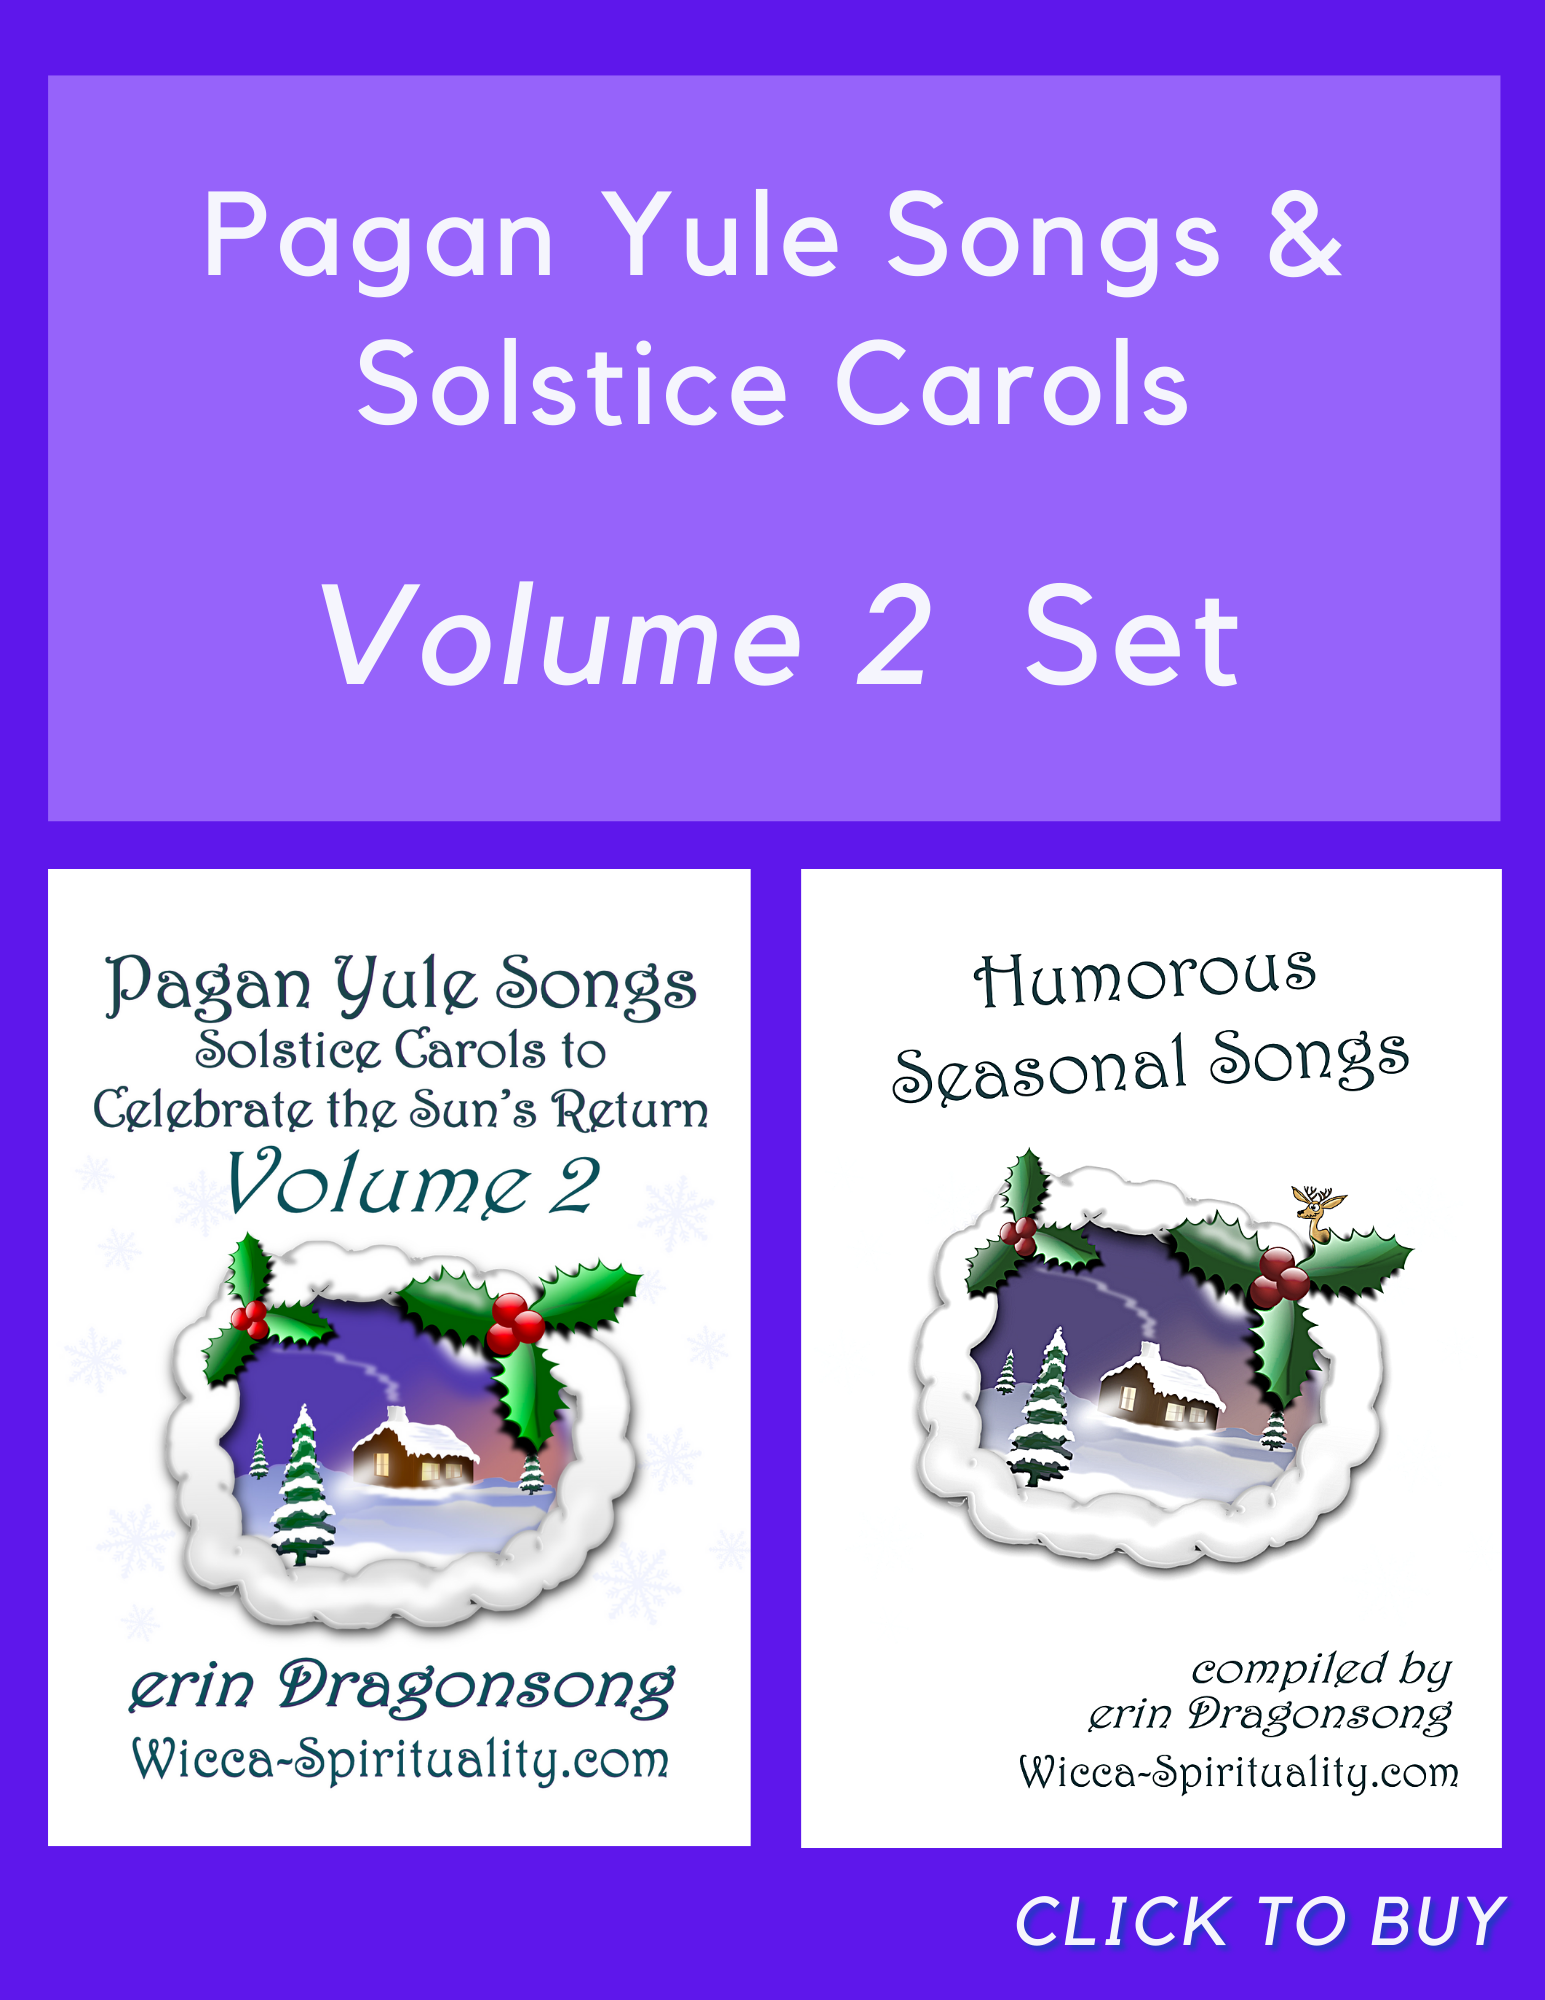  Please click to get your Pagan Yule Songbooks SET Volume 2 © Wicca-Spirituality.com